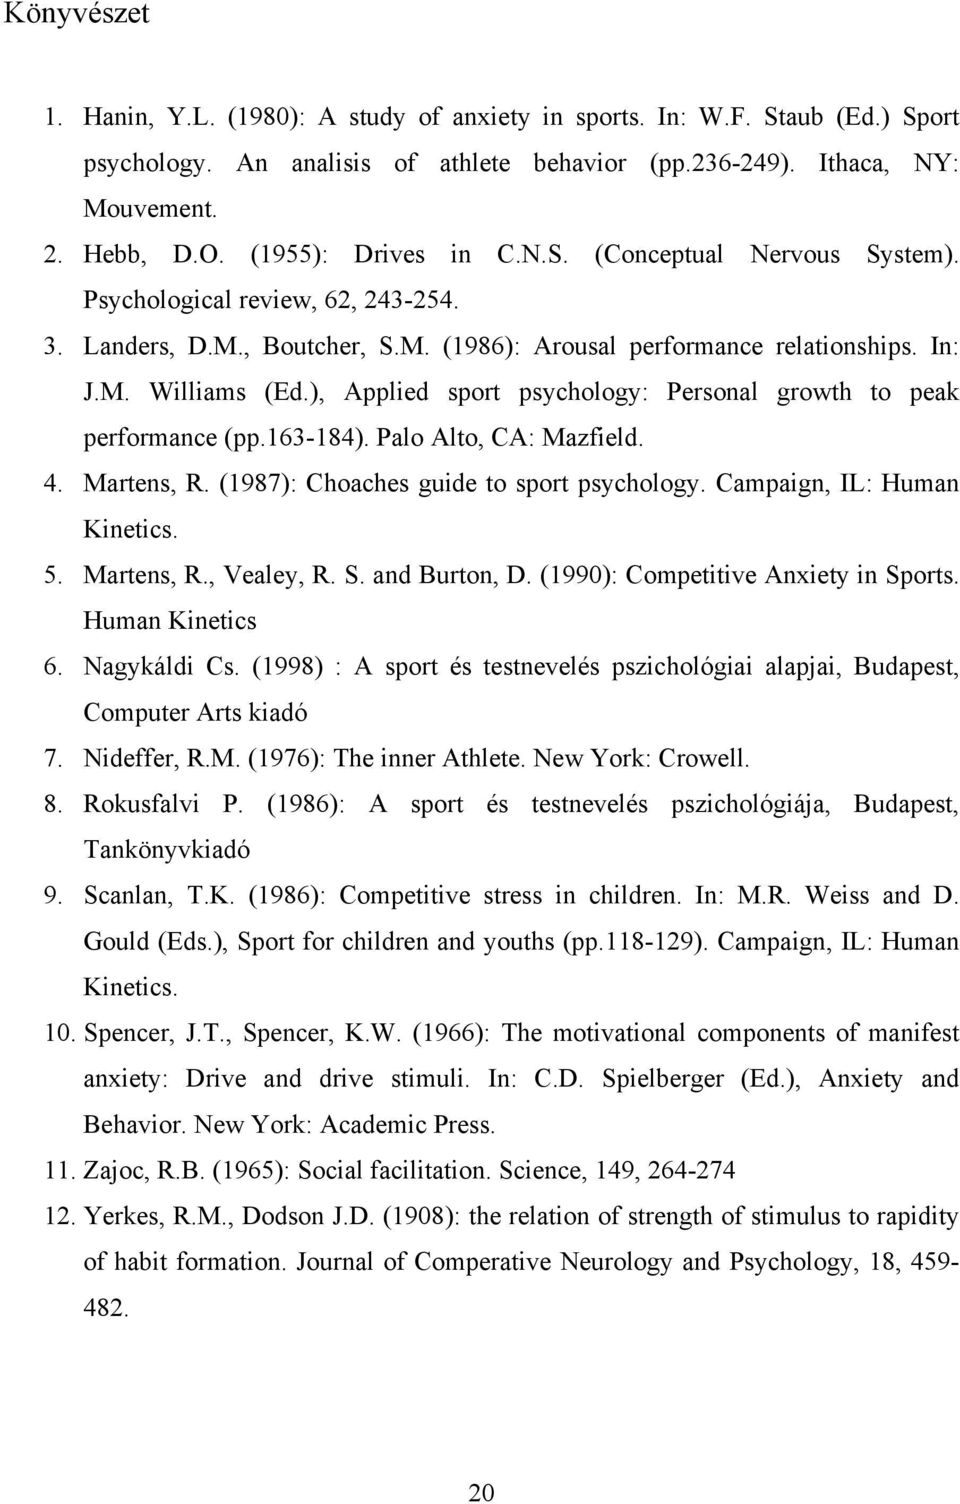 ), Applied sport psychology: Personal growth to peak performance (pp.163-184). Palo Alto, CA: Mazfield. 4. Martens, R. (1987): Choaches guide to sport psychology. Campaign, IL: Human Kinetics. 5.